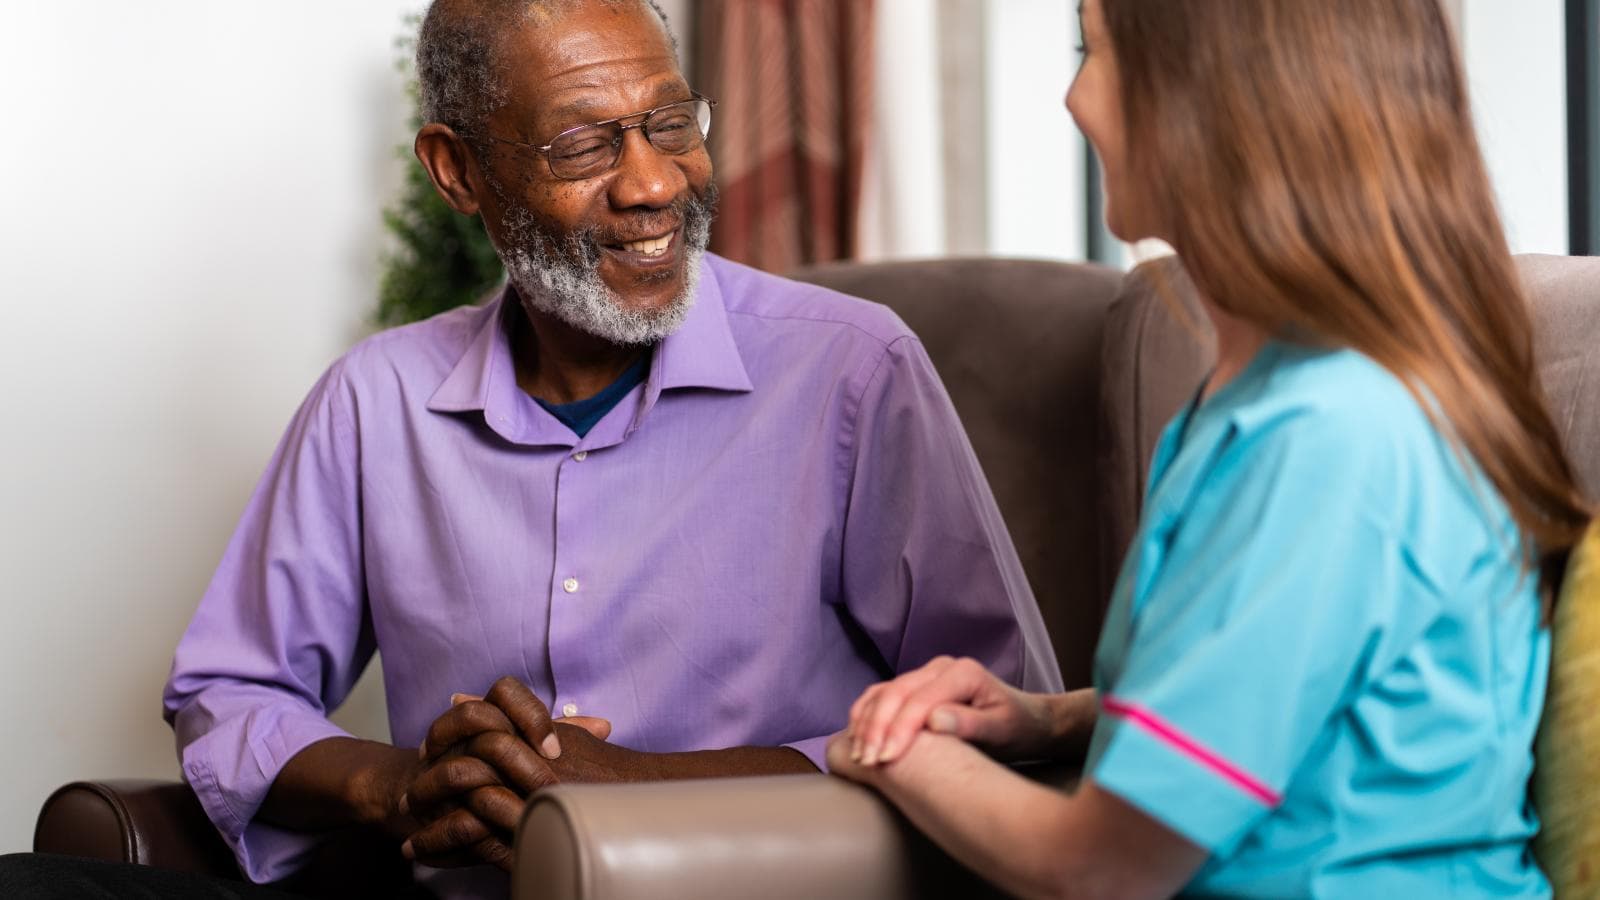 Male wearing pink shirt with grey hair speaking to female care assistant